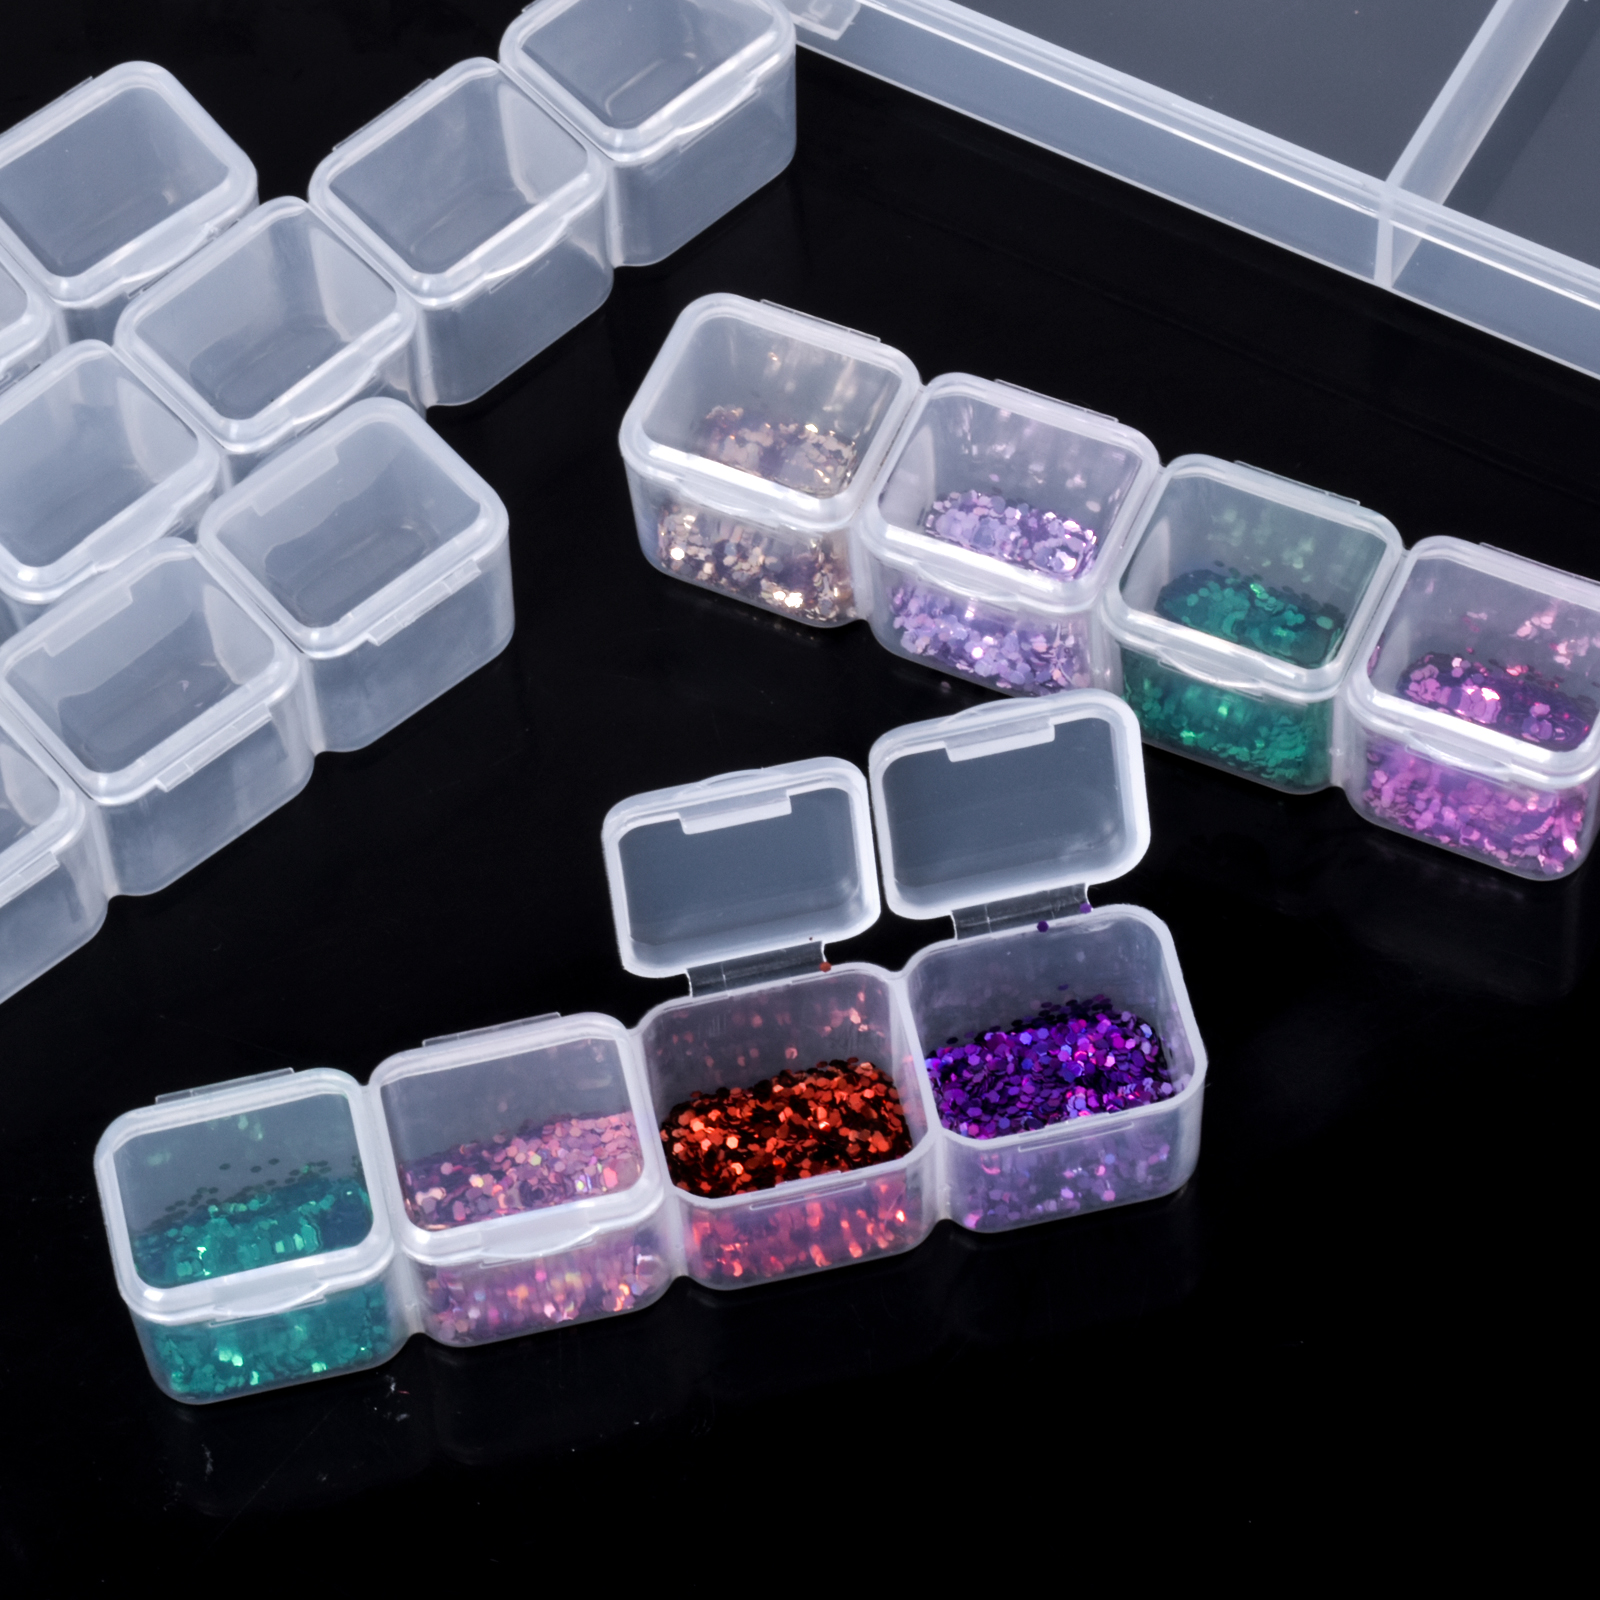 CDIYTOOL Seed Storage Box, Transparent Clear Seed Beads Container Plastic  Seed Storage Organizer Reusable Storage Container for Flower Vegetable Seed